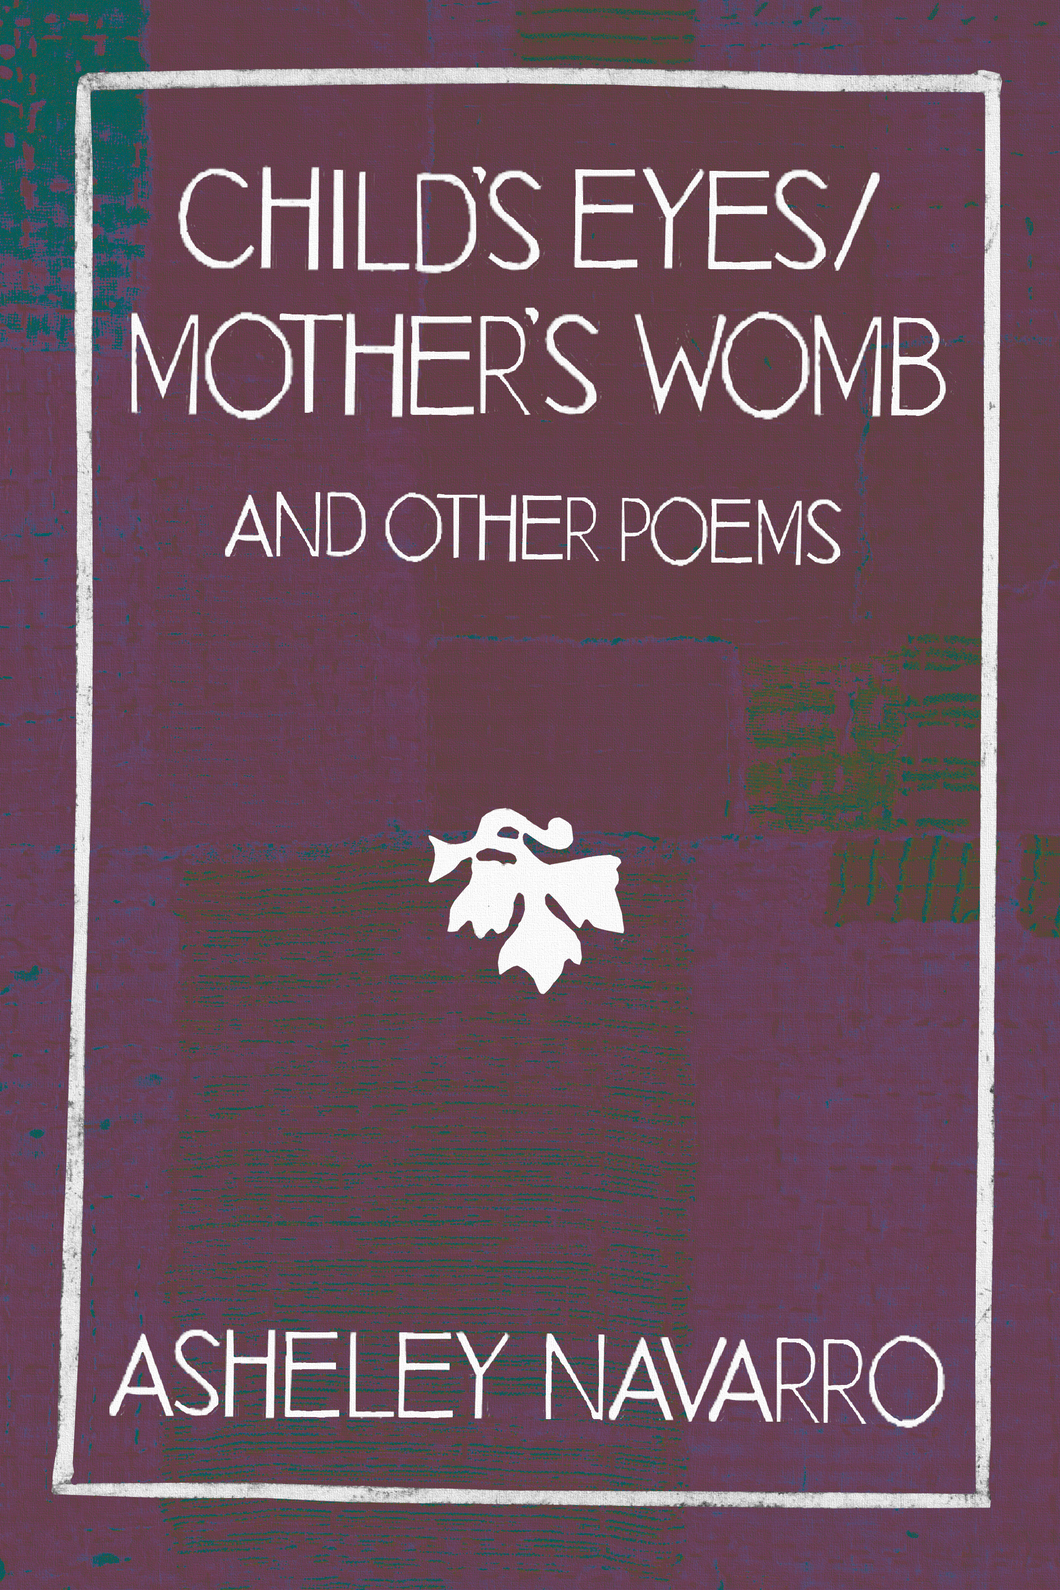 Child's Eyes / Mother's Womb and Other Poems, by Asheley Navarro-Print Books-Bottlecap Press